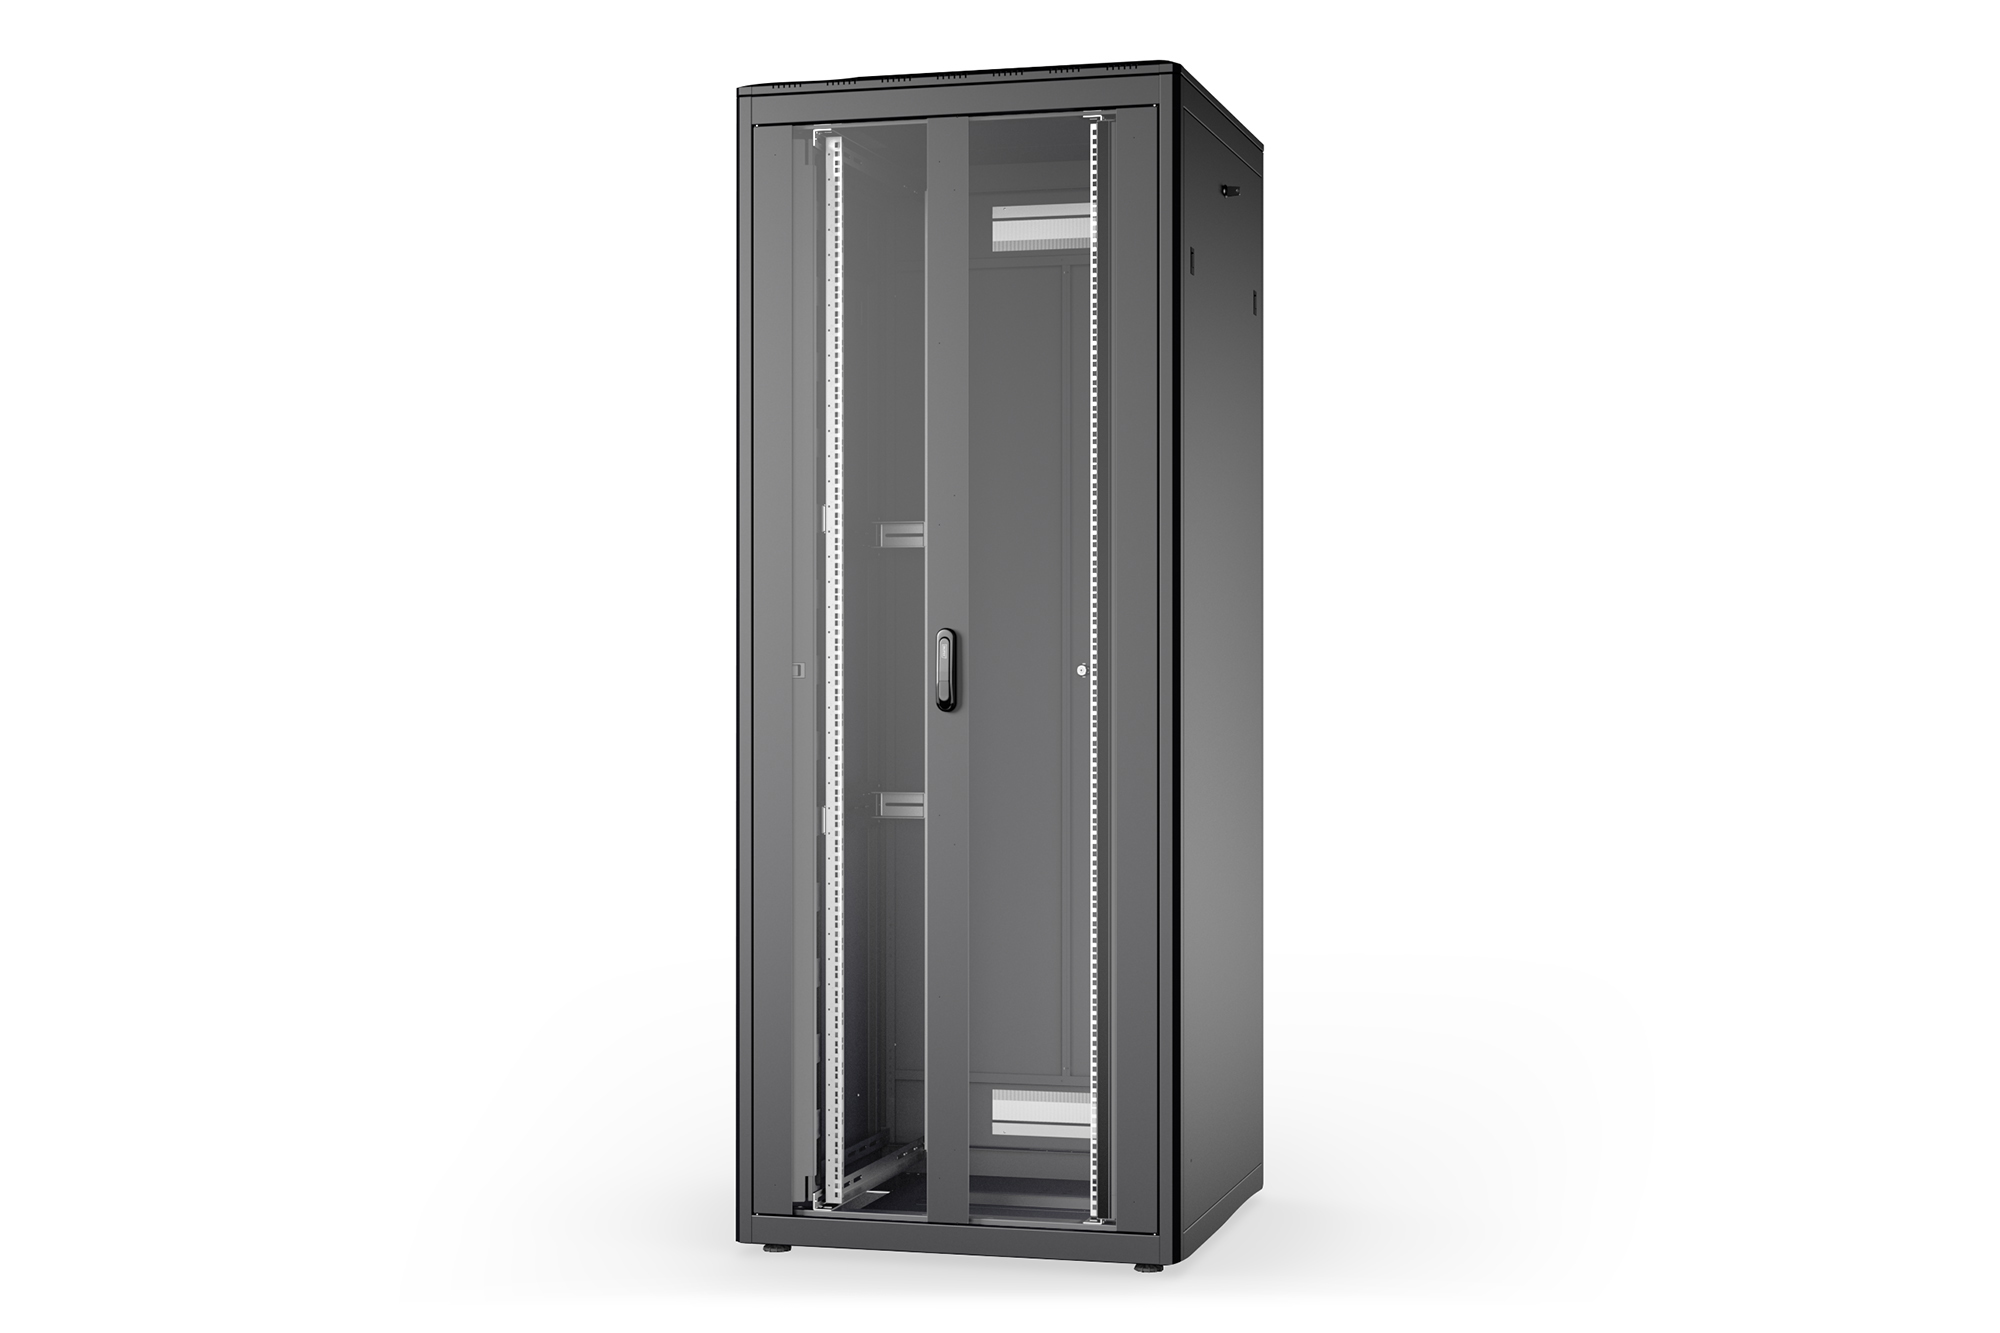 Top 8 most important accessories for server racks - RackSolutions